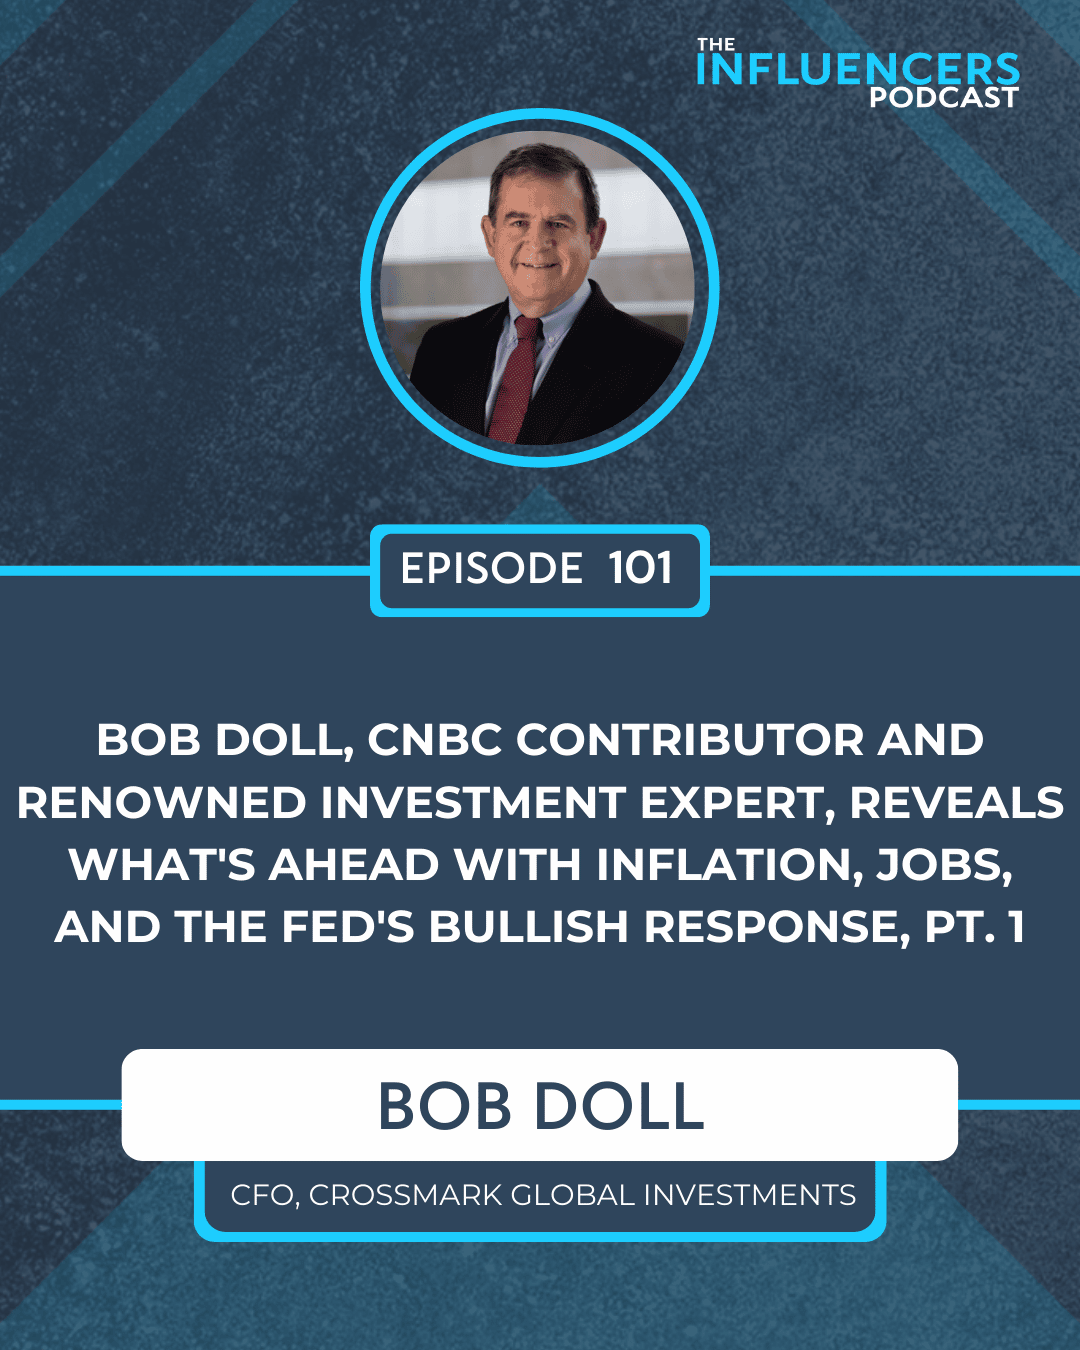 Episode 101 with Bob Doll.